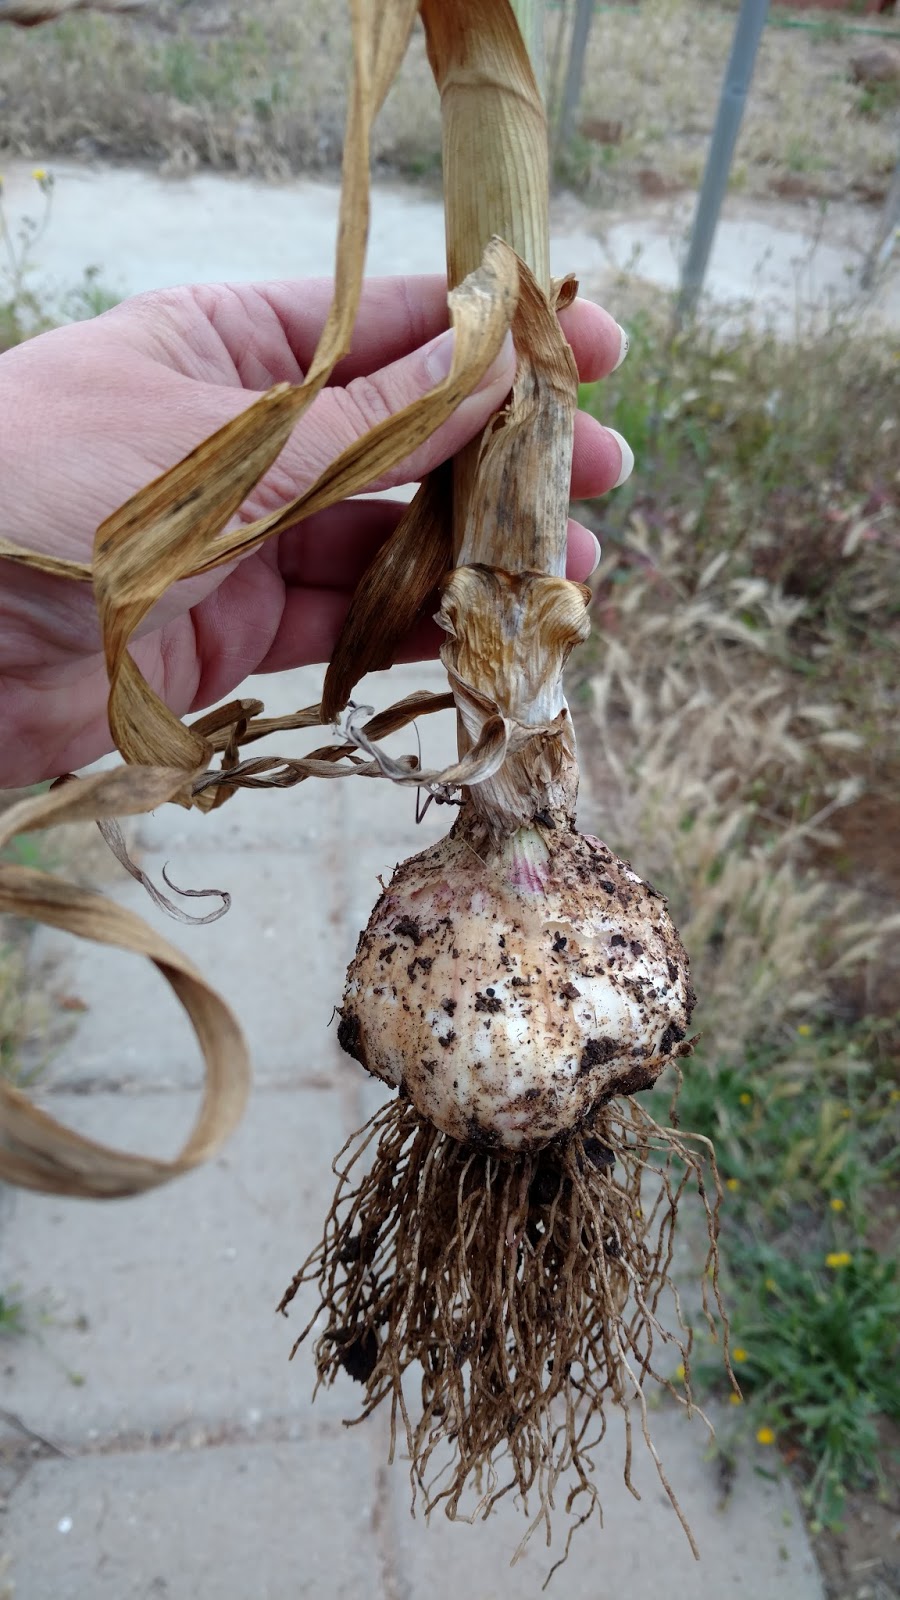 Is Chinese Garlic Grown in Human Feces? 